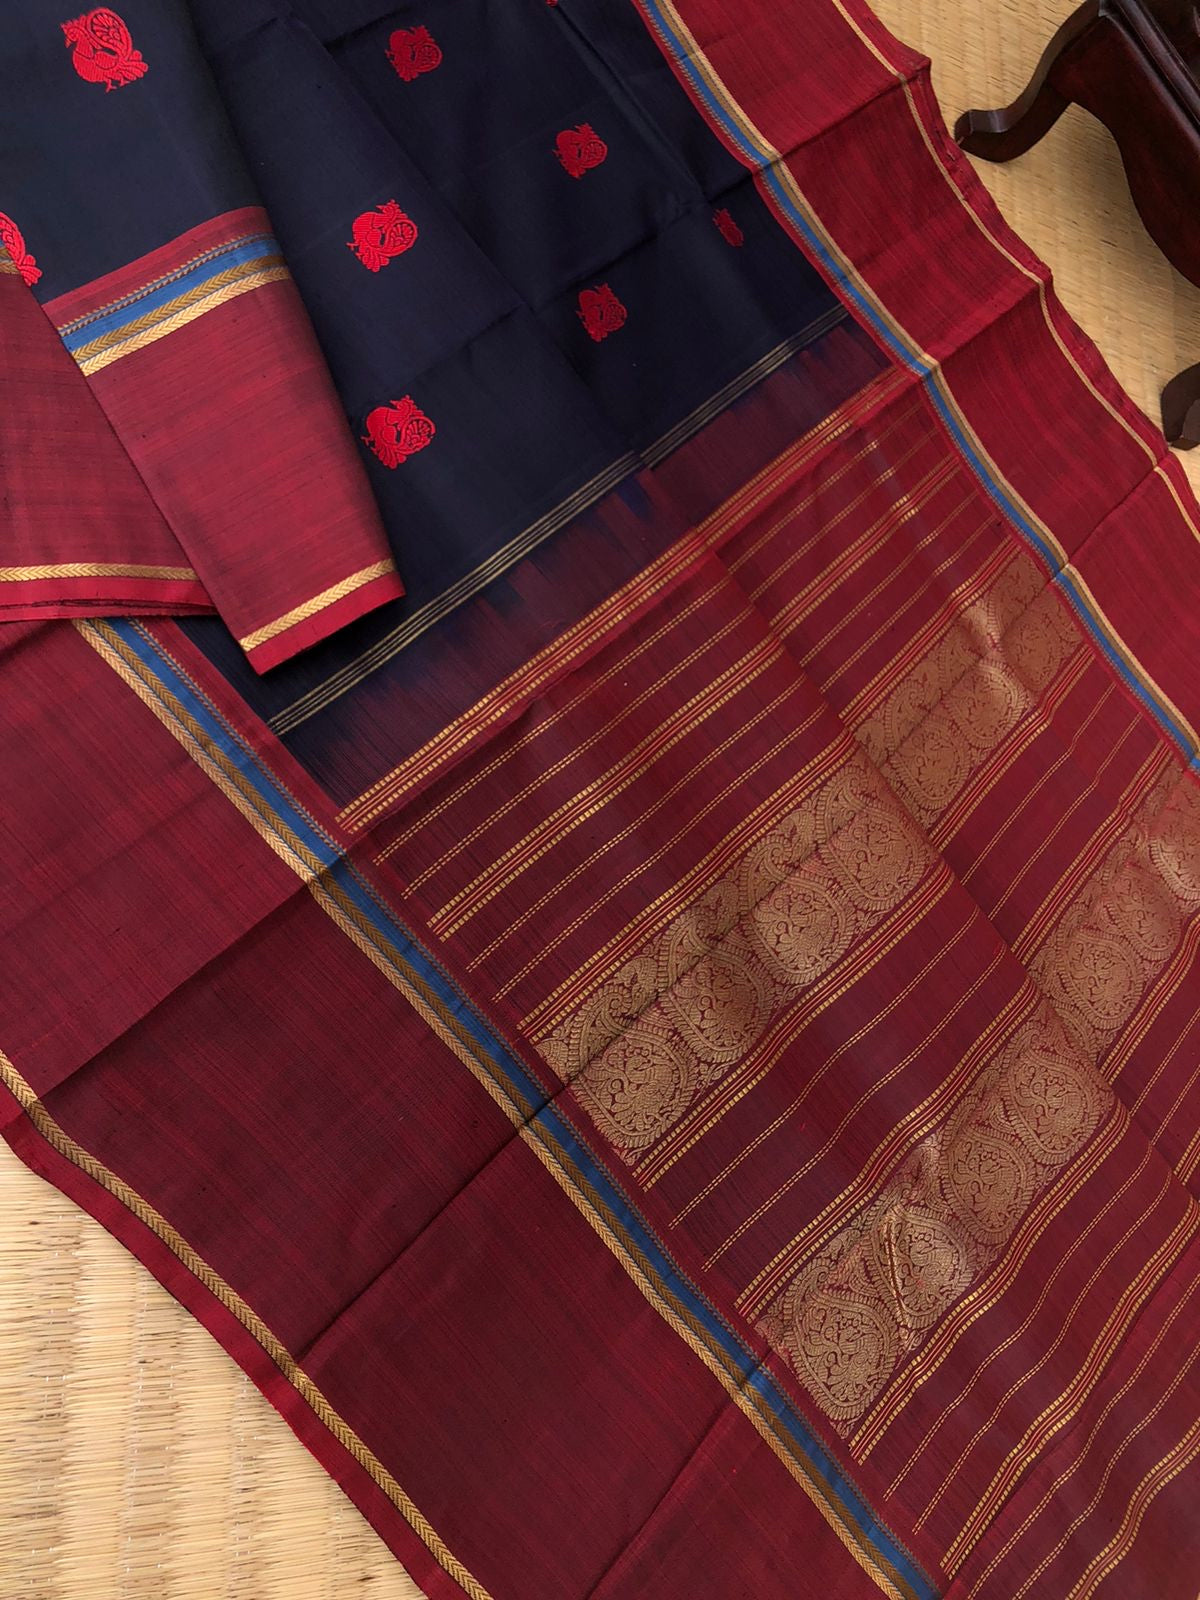 Kaavyam on Kanchivaram - the one of a kind deep mid night black blue body with annapakshi woven buttas with deep maroon borders pallu and blouse